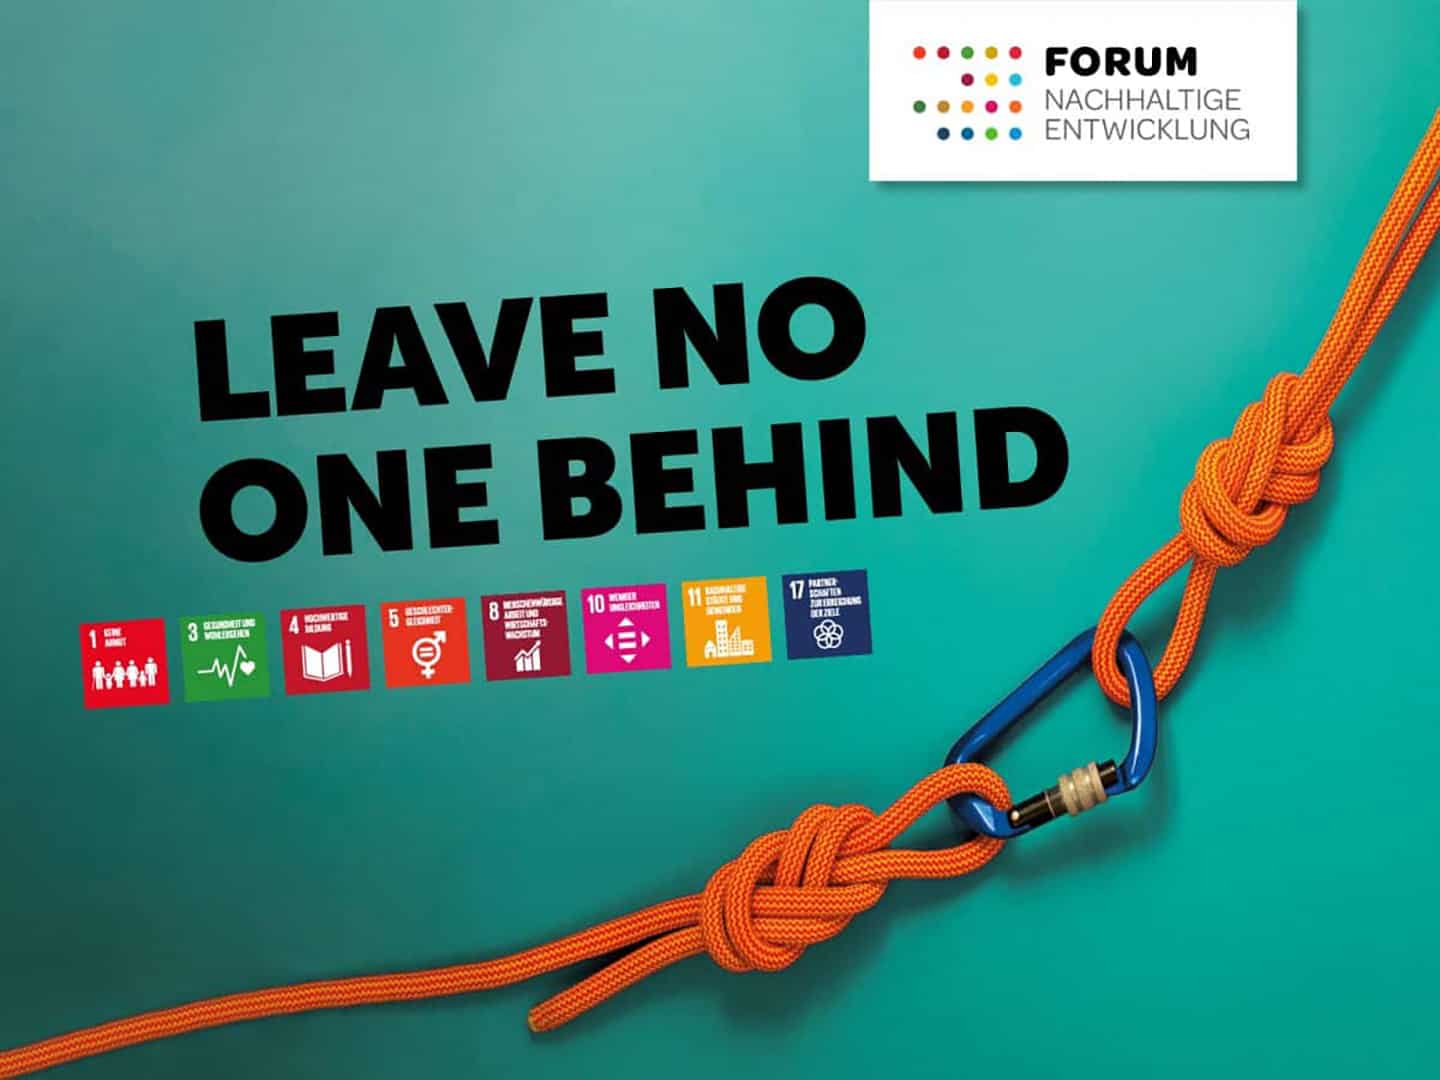 leave-no-one-behind-forum